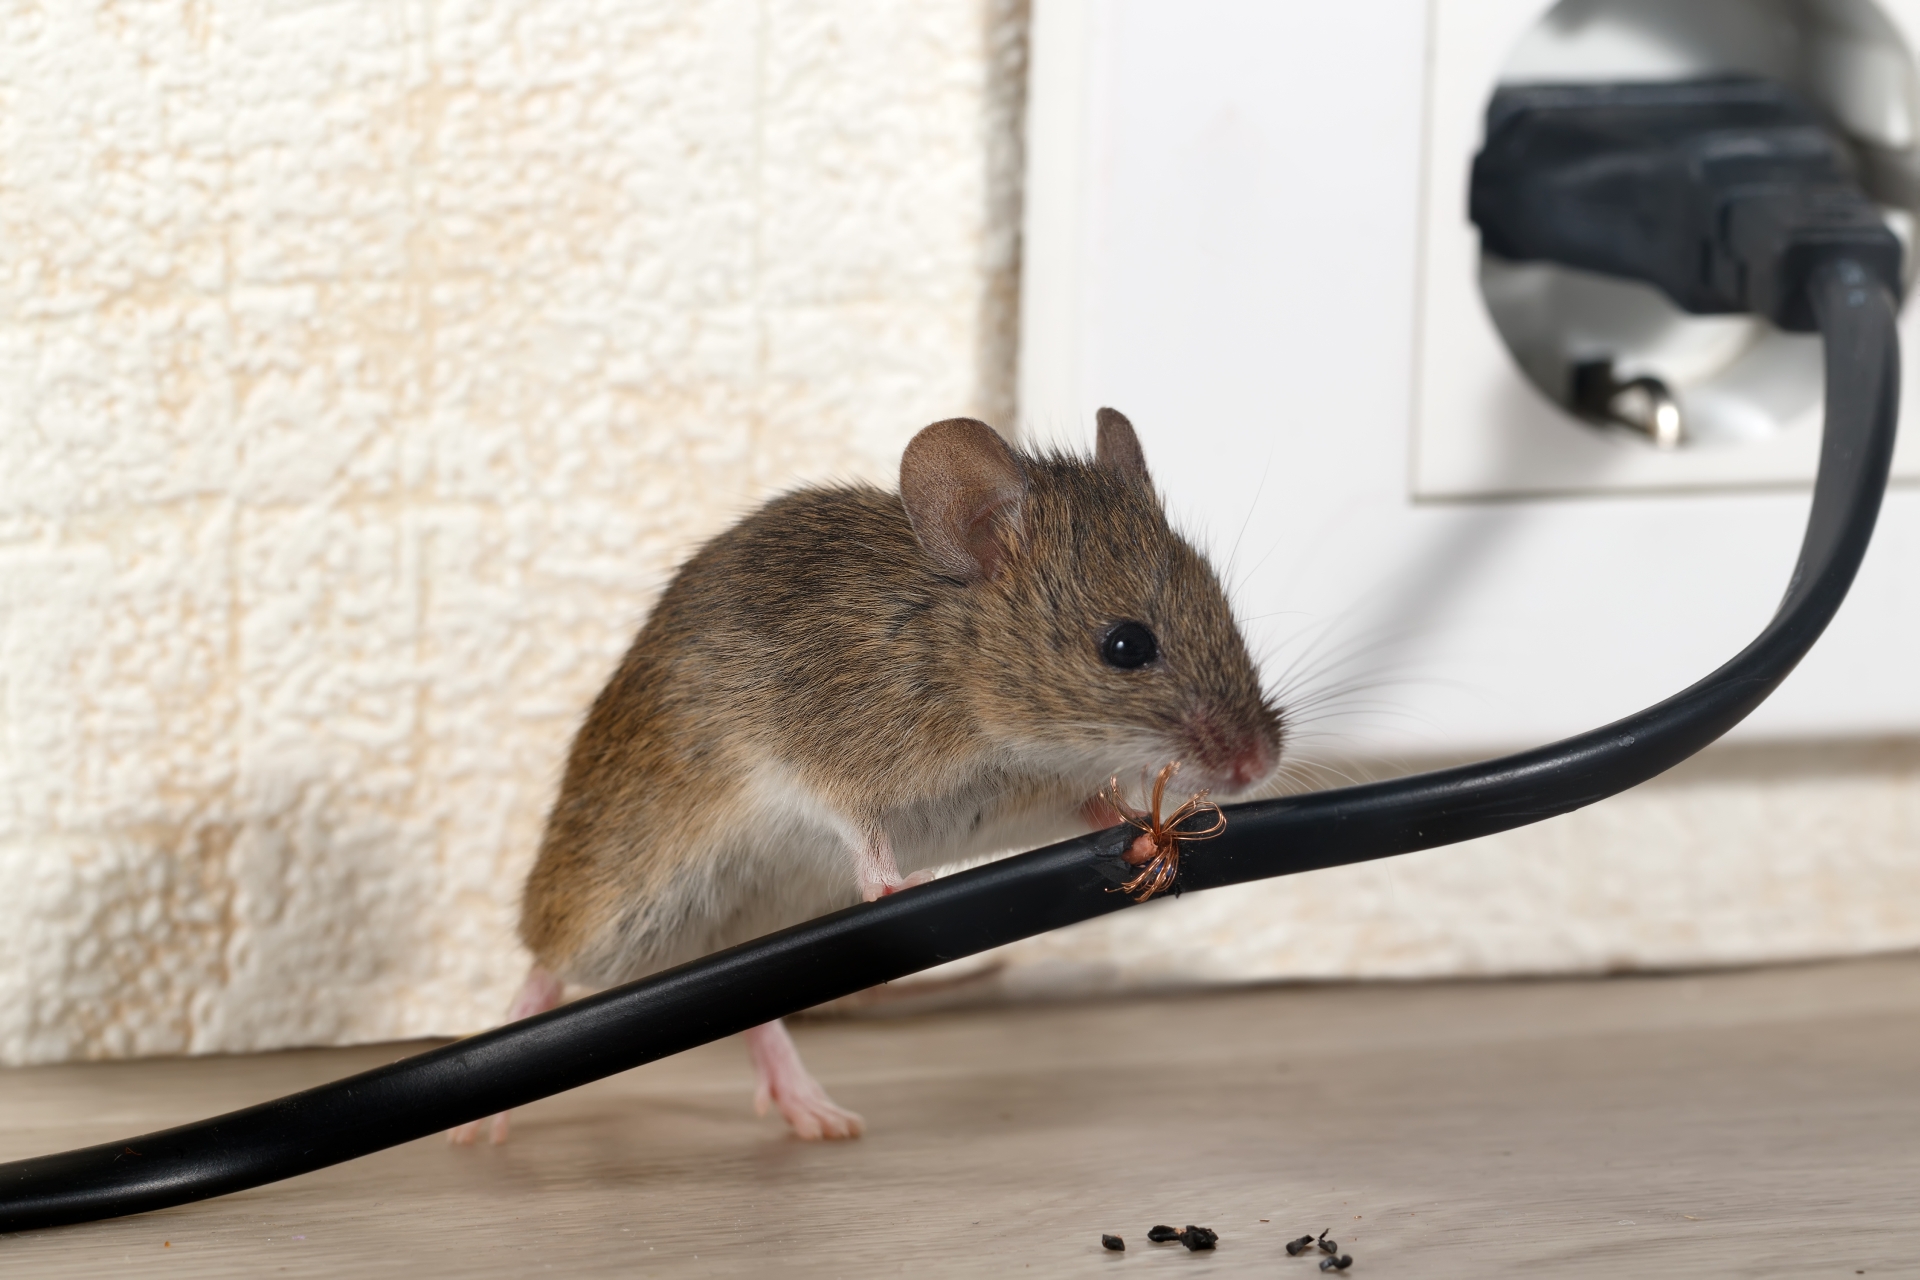 Mice Infestation, Pest Control in Friern Barnet, New Southgate, N11. Call Now 020 8166 9746